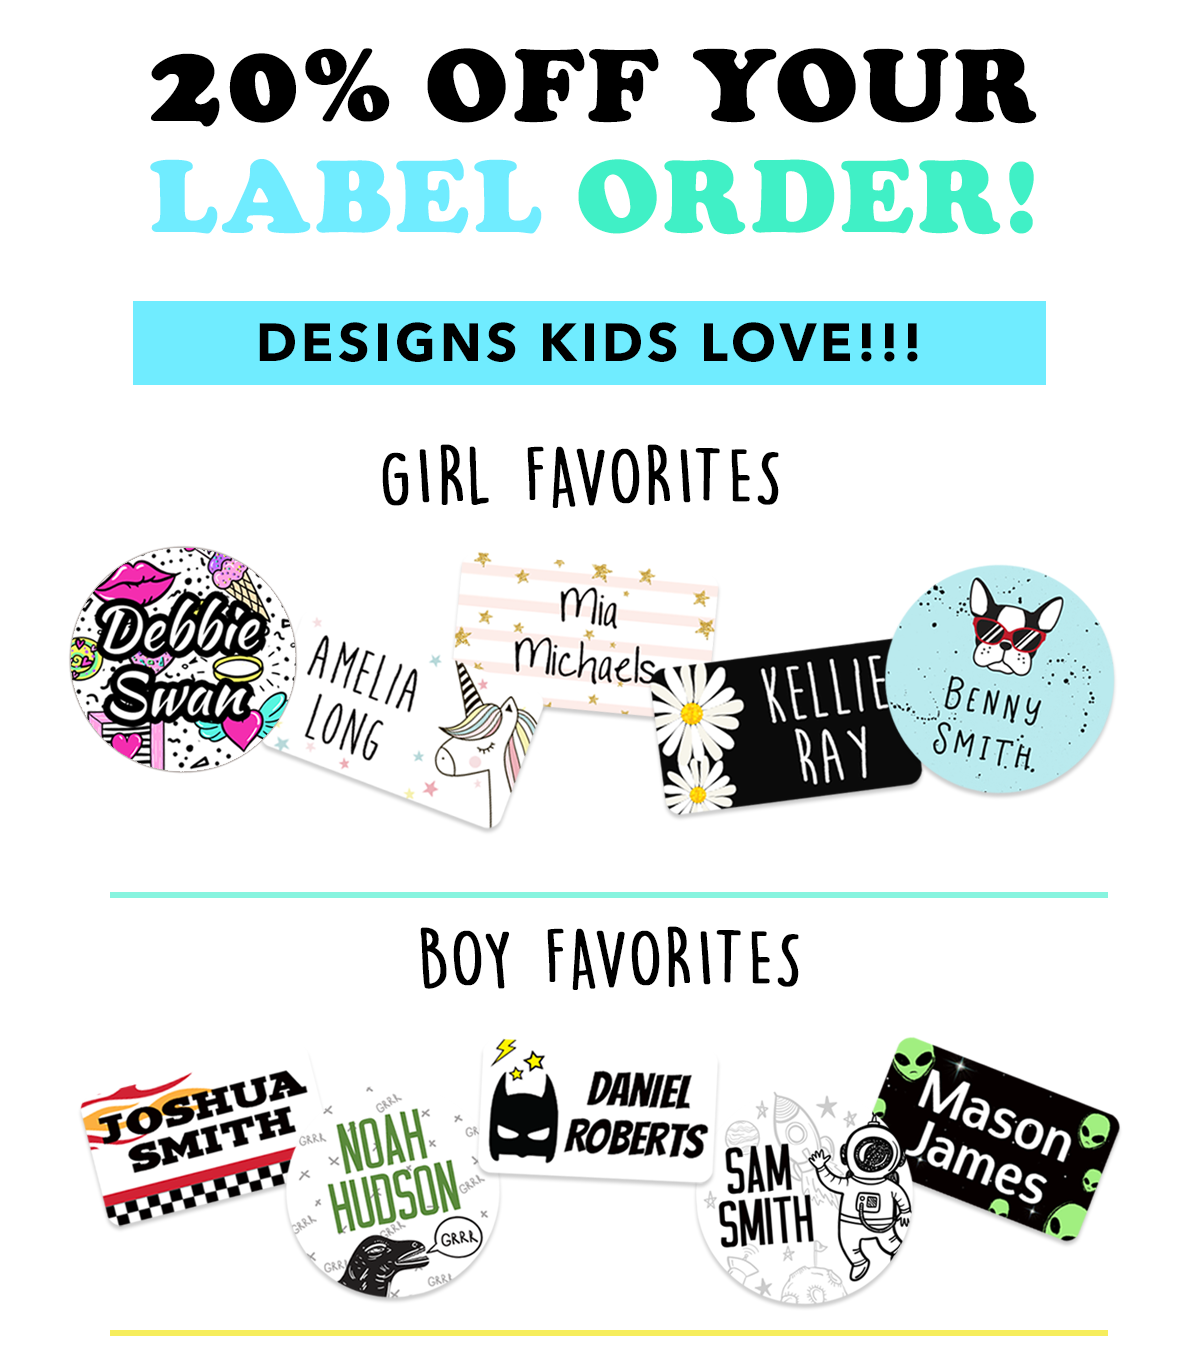 20% off your label order